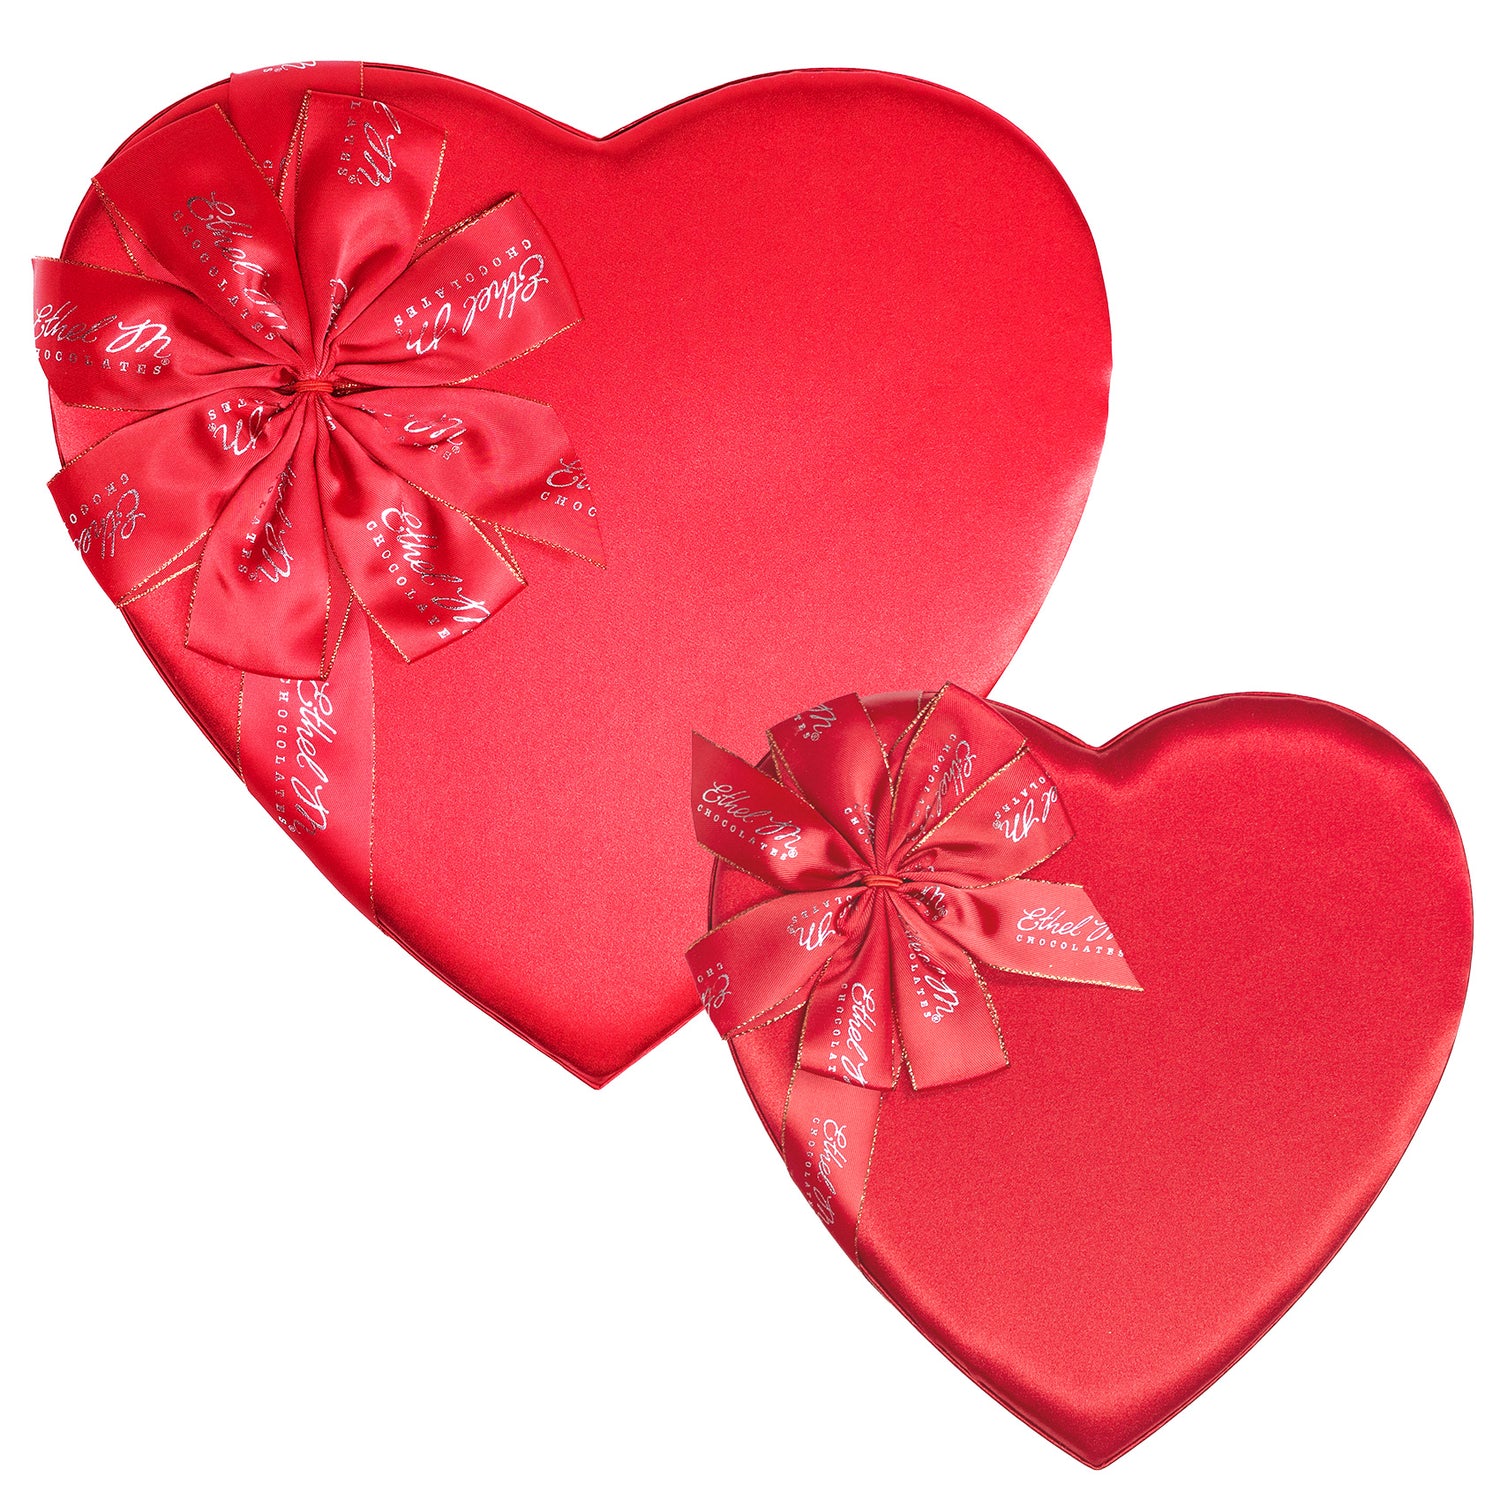 Heart box, shiny red, with bow, 16 ounces – Hercules Candy and